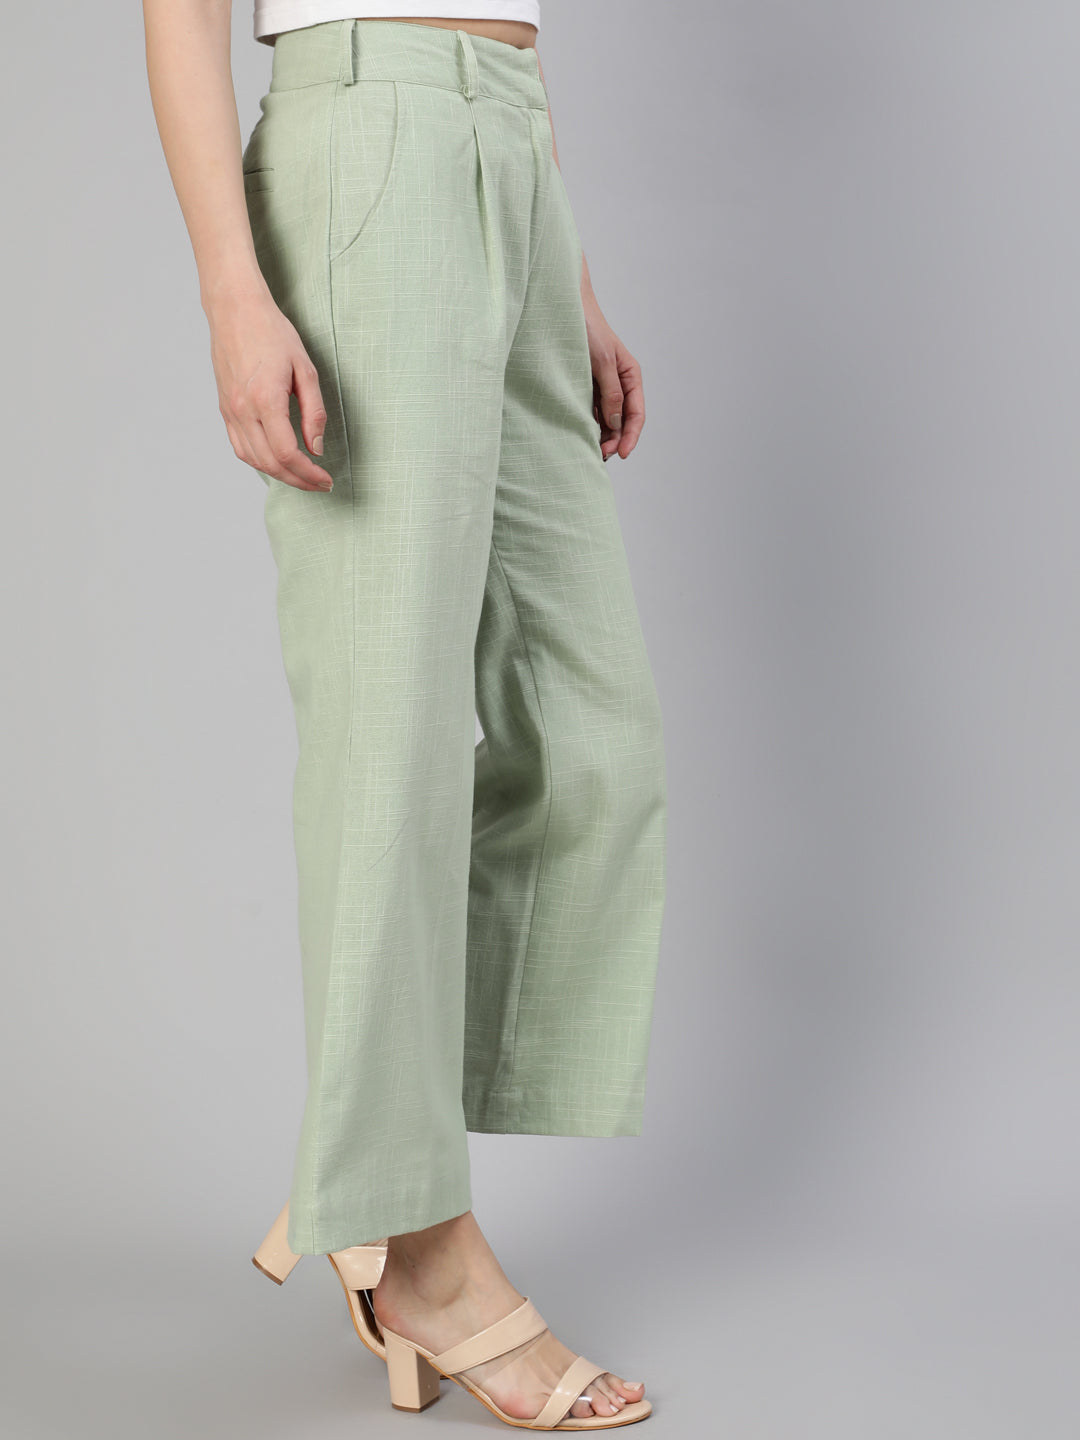 Shop parallel pants with top